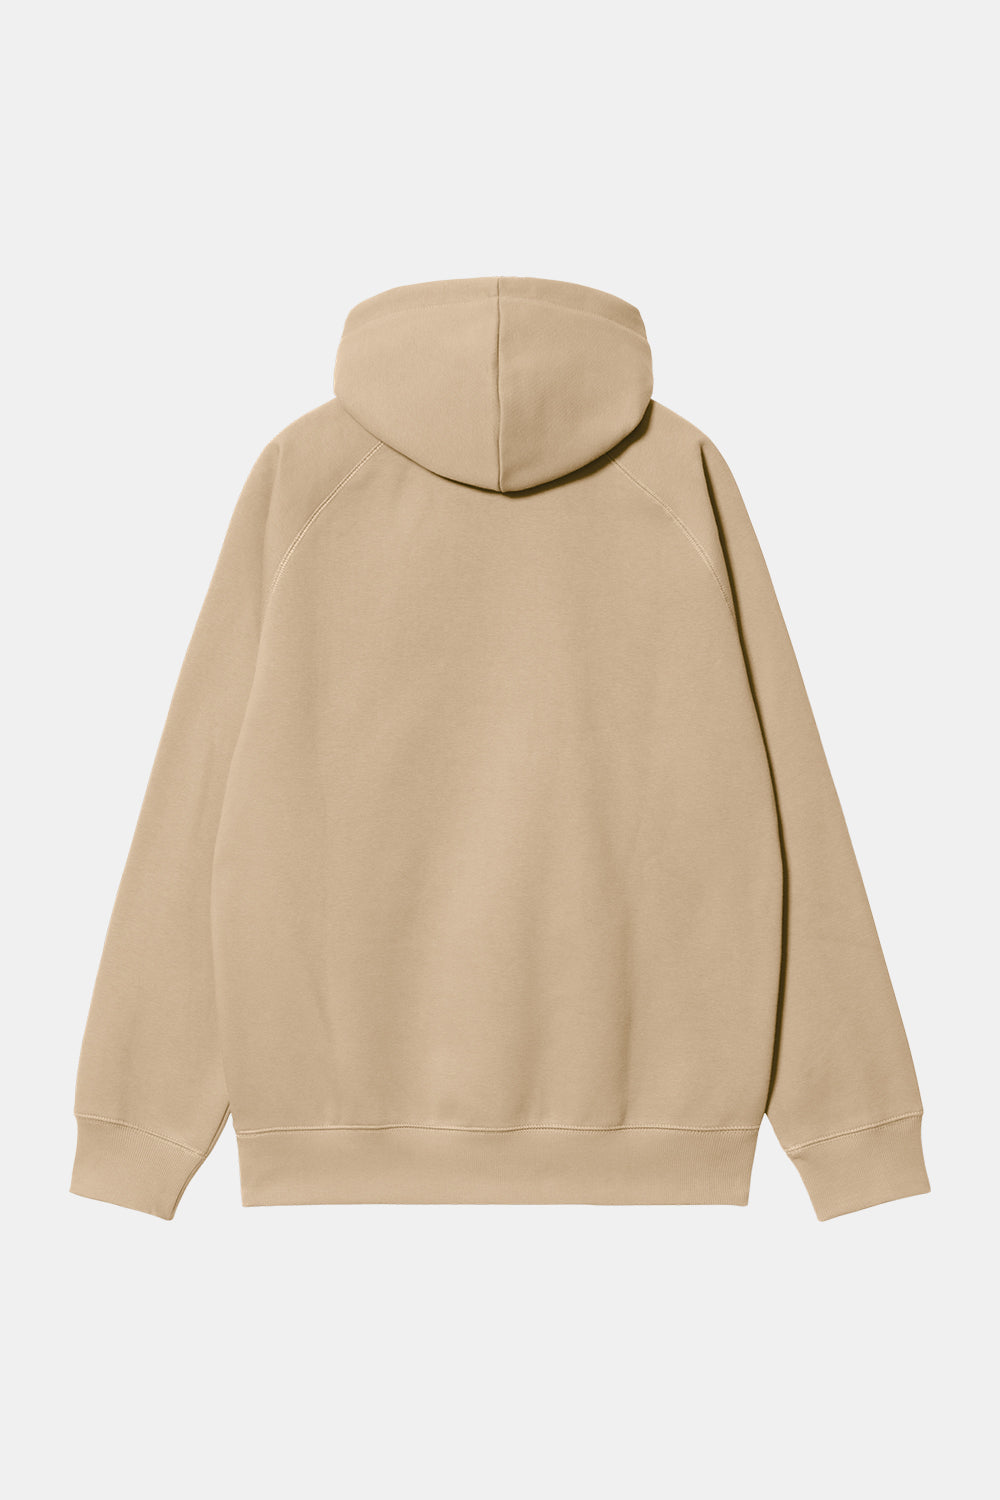 Carhartt WIP Hooded Chase Sweat (Sable/Gold)